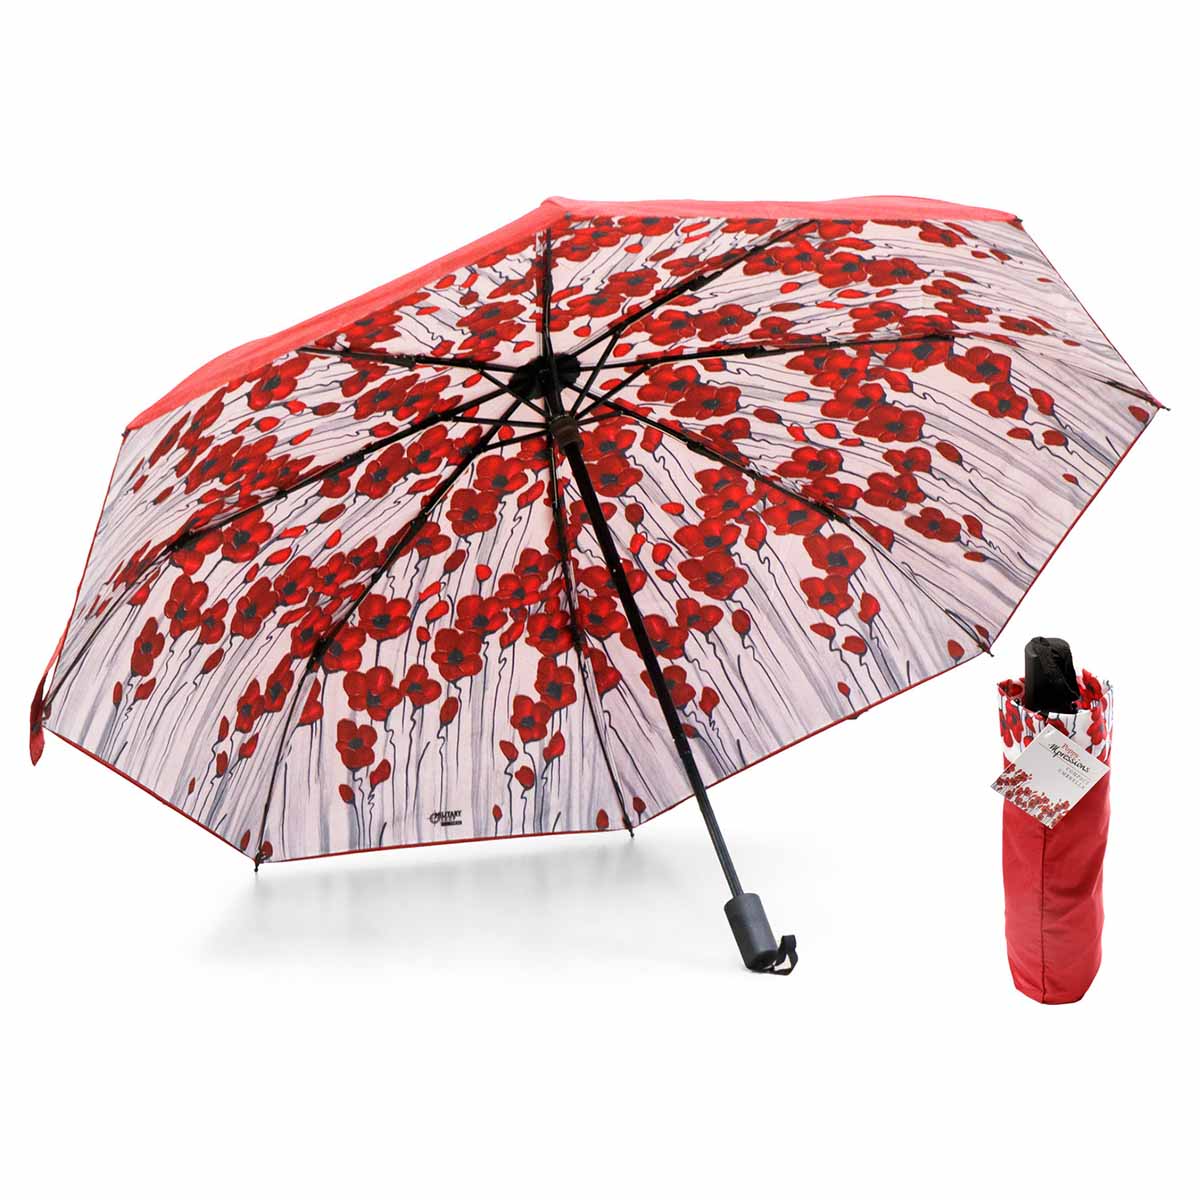 Poppy Mpressions Fields of Poppies Compact Umbrella